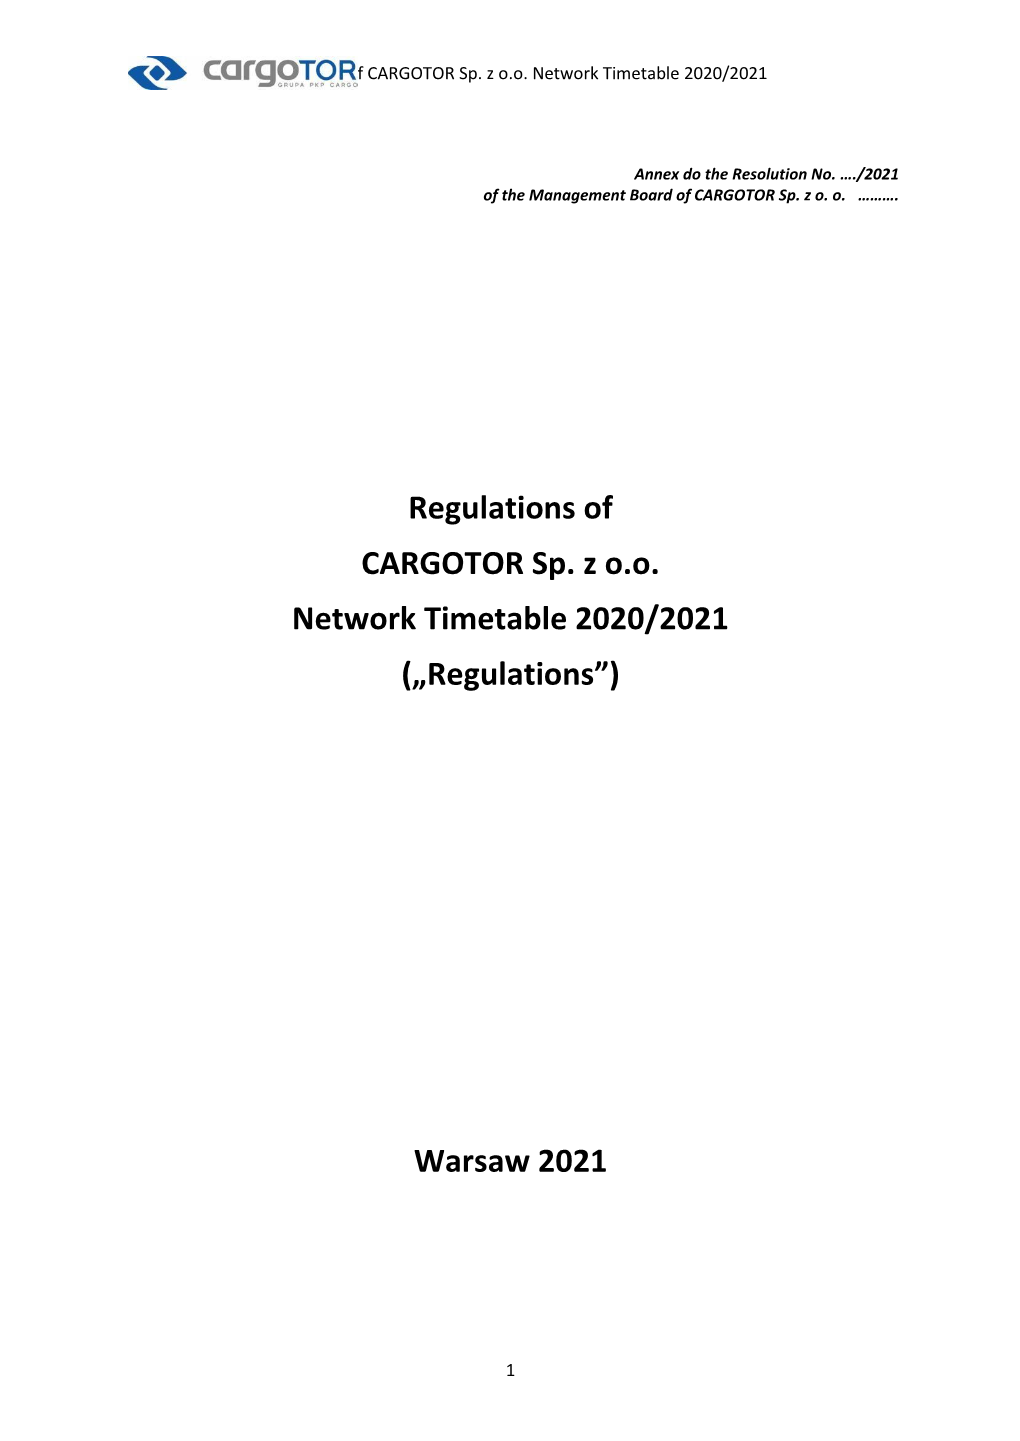 Regulations of CARGOTOR Sp. Z O.O. Network Timetable 2020/2021